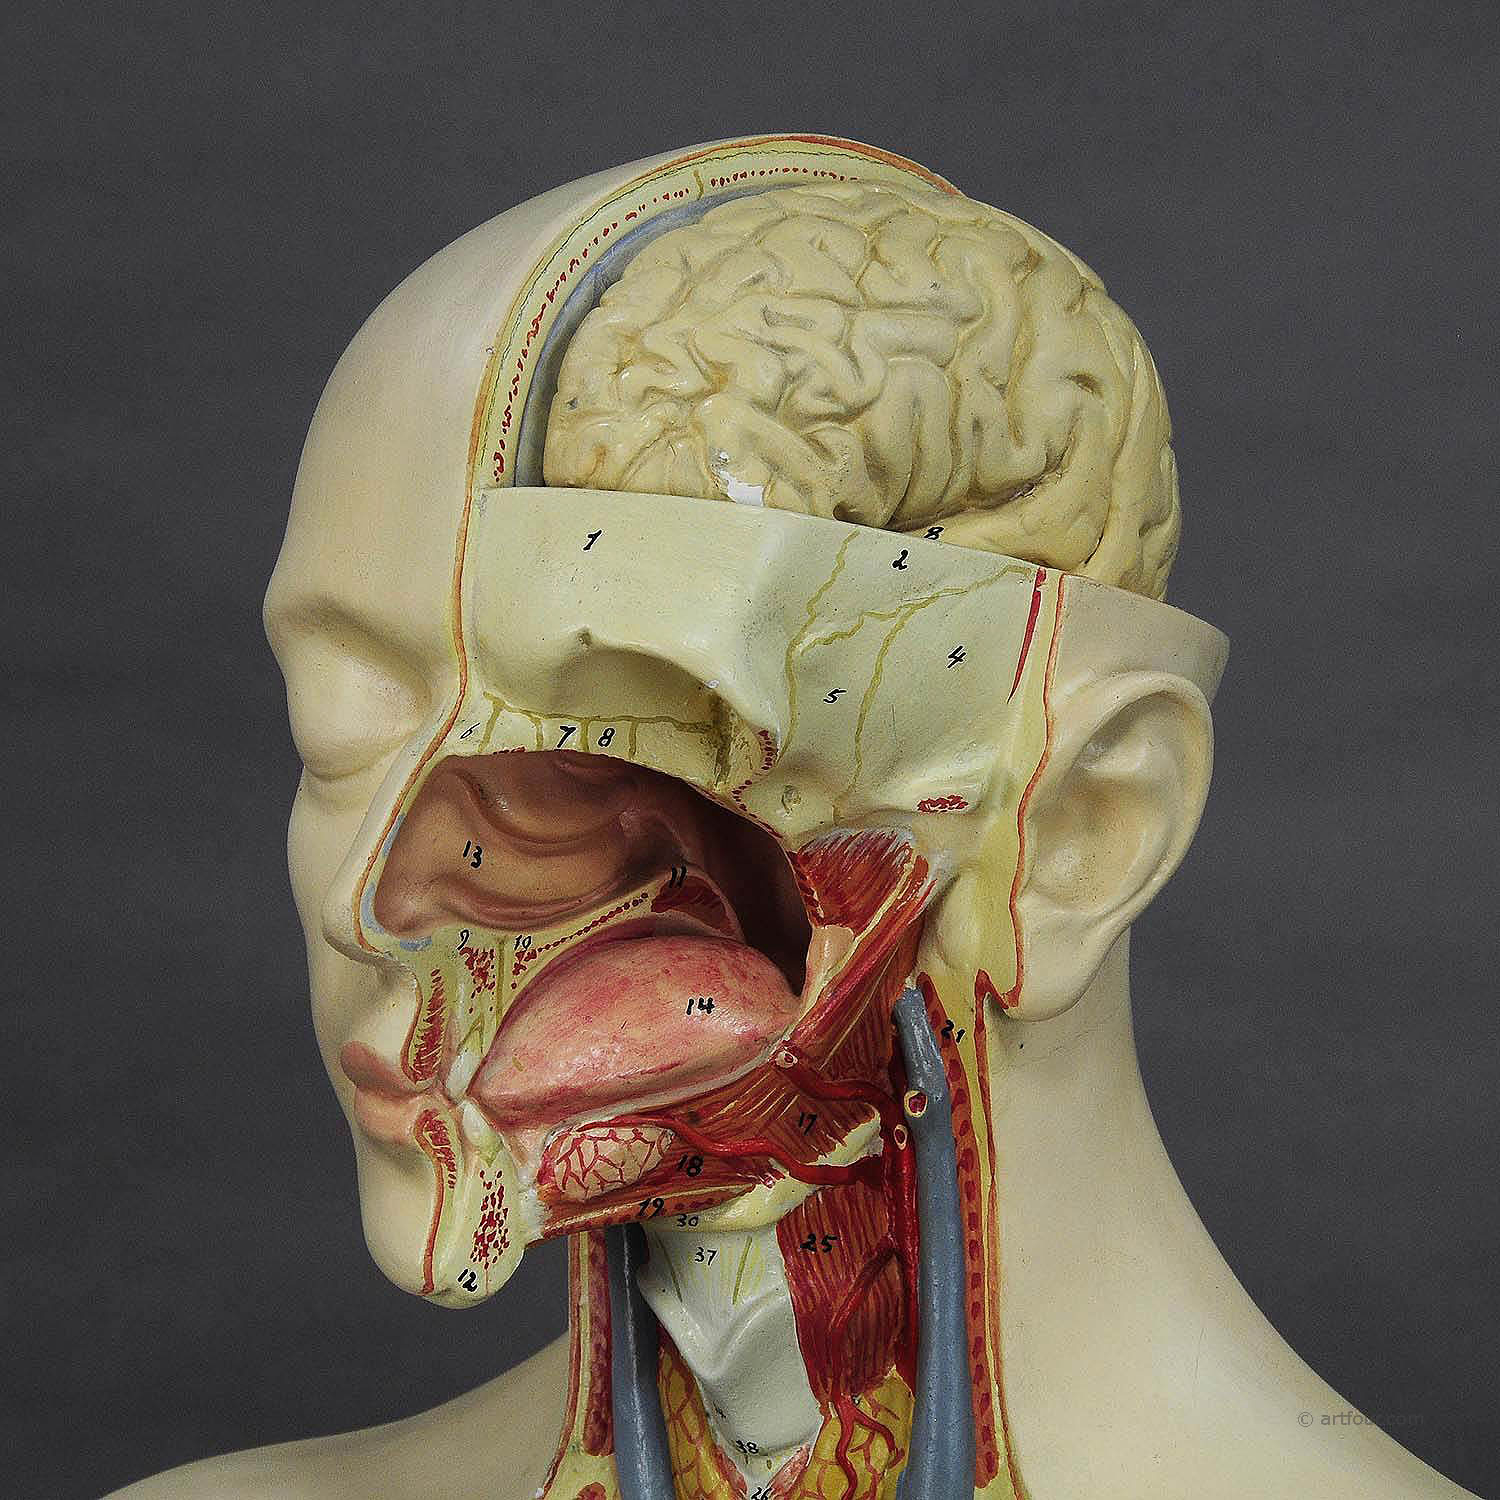 Great Male Anatomical Bust by Louis M. Meusel, Circa 1920